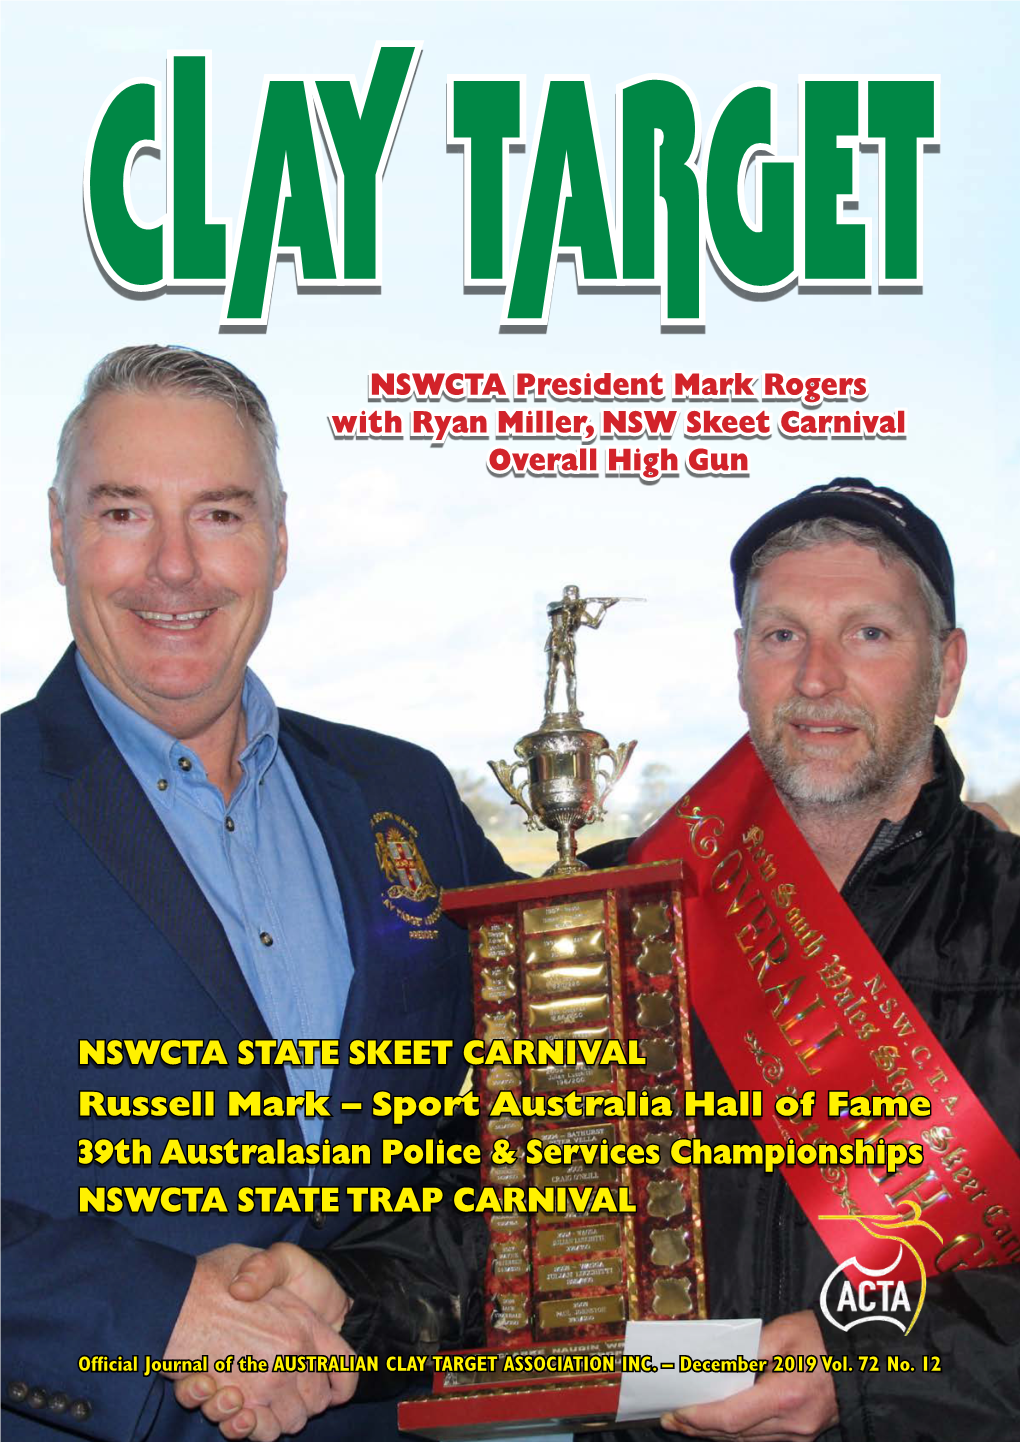 NSWCTA STATE SKEET CARNIVAL Russell Mark – Sport Australia Hall of Fame 39Th Australasian Police & Services Championships NSWCTA STATE TRAP CARNIVAL